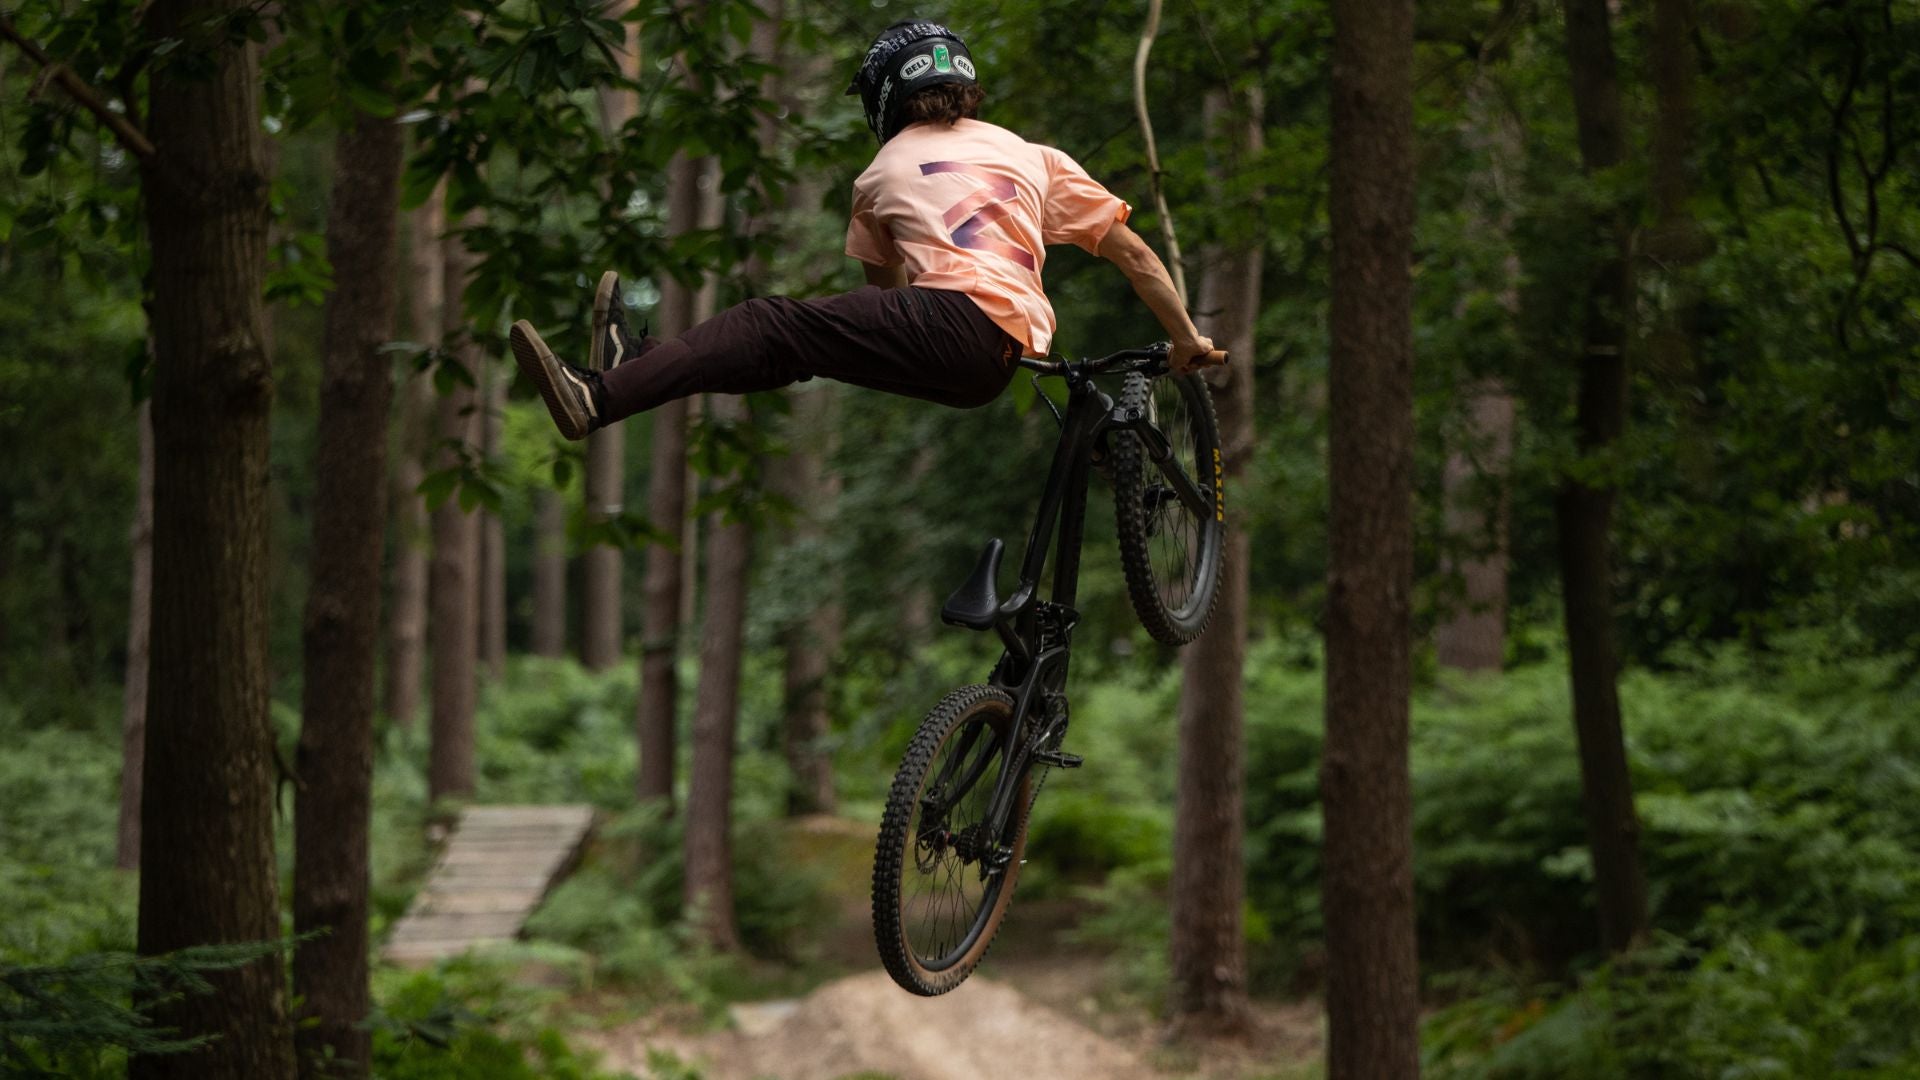 Mountain biker in mid-jump on a downhill course, wearing durable MTB pants, showcasing their strength and ability to withstand extreme riding conditions.